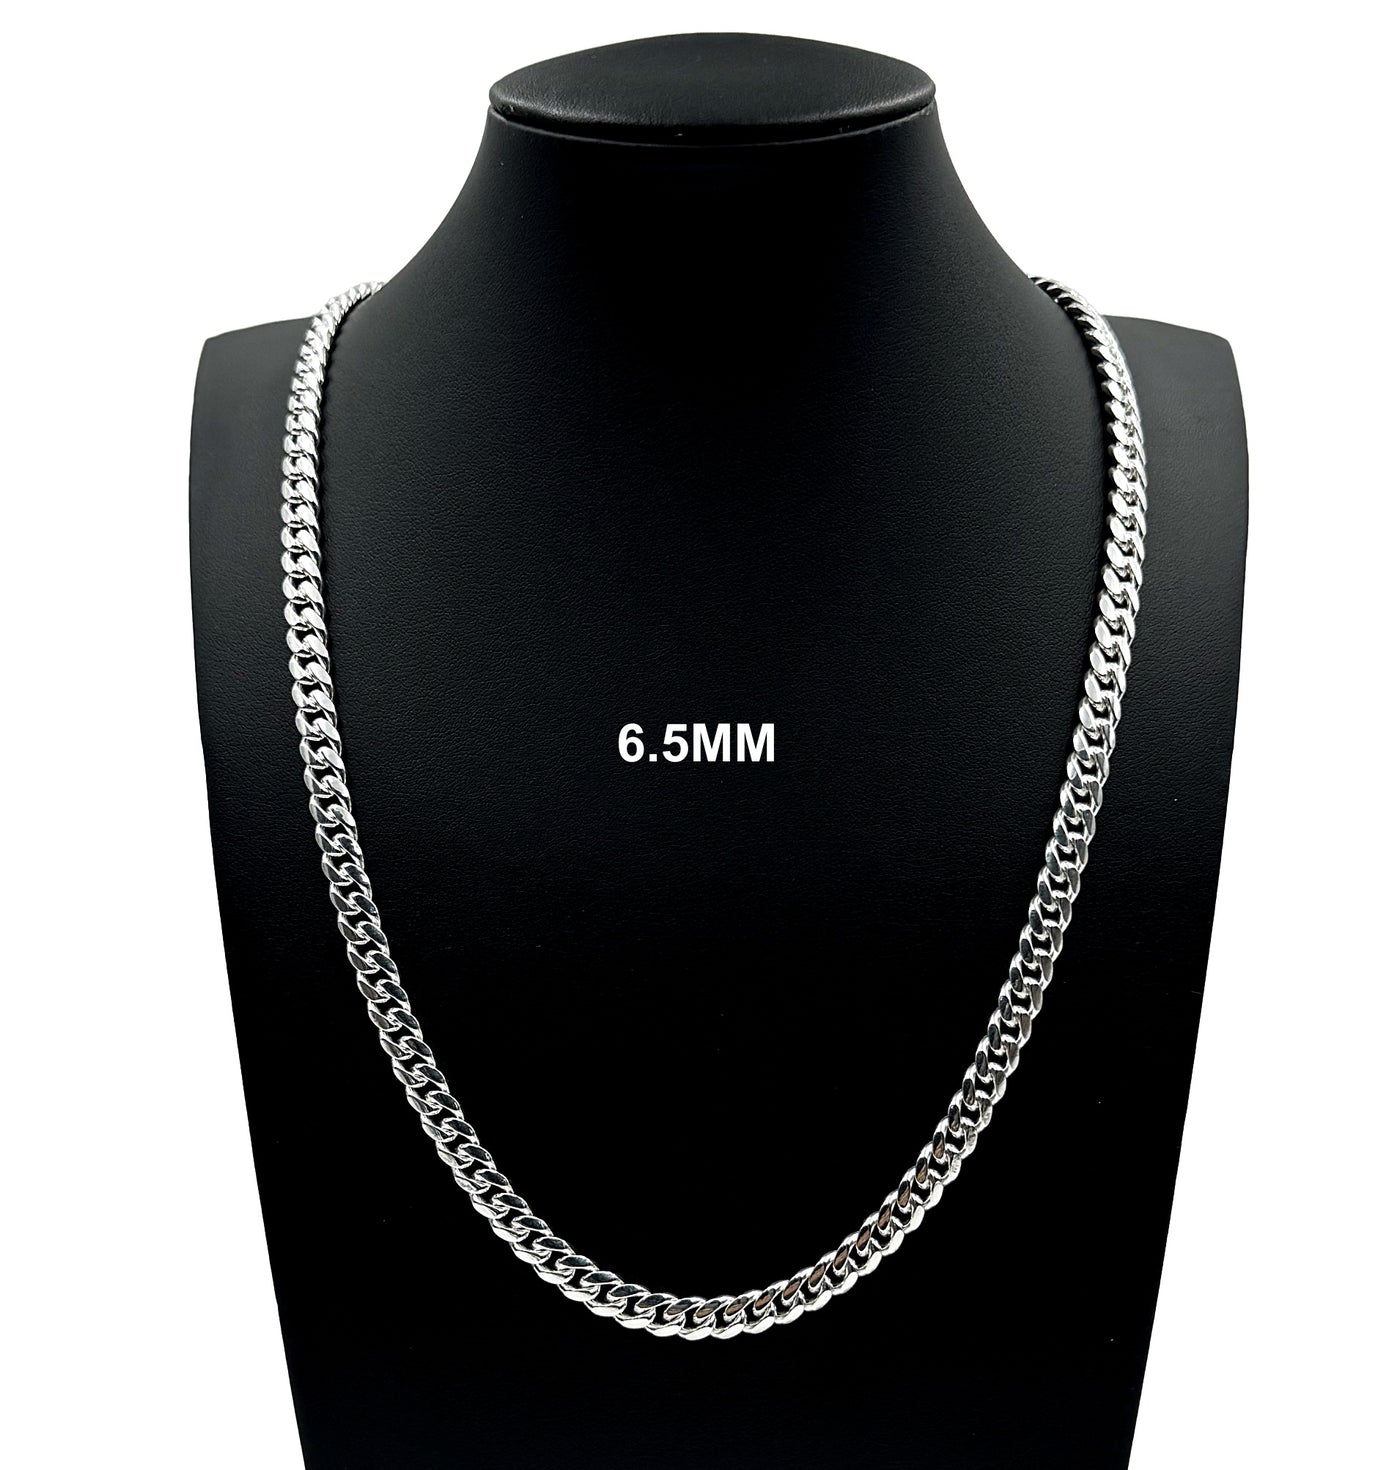 Real 6.5MM Solid 925 Sterling Silver Italian MIAMI CUBAN LINK CHAIN Necklace UNISEX